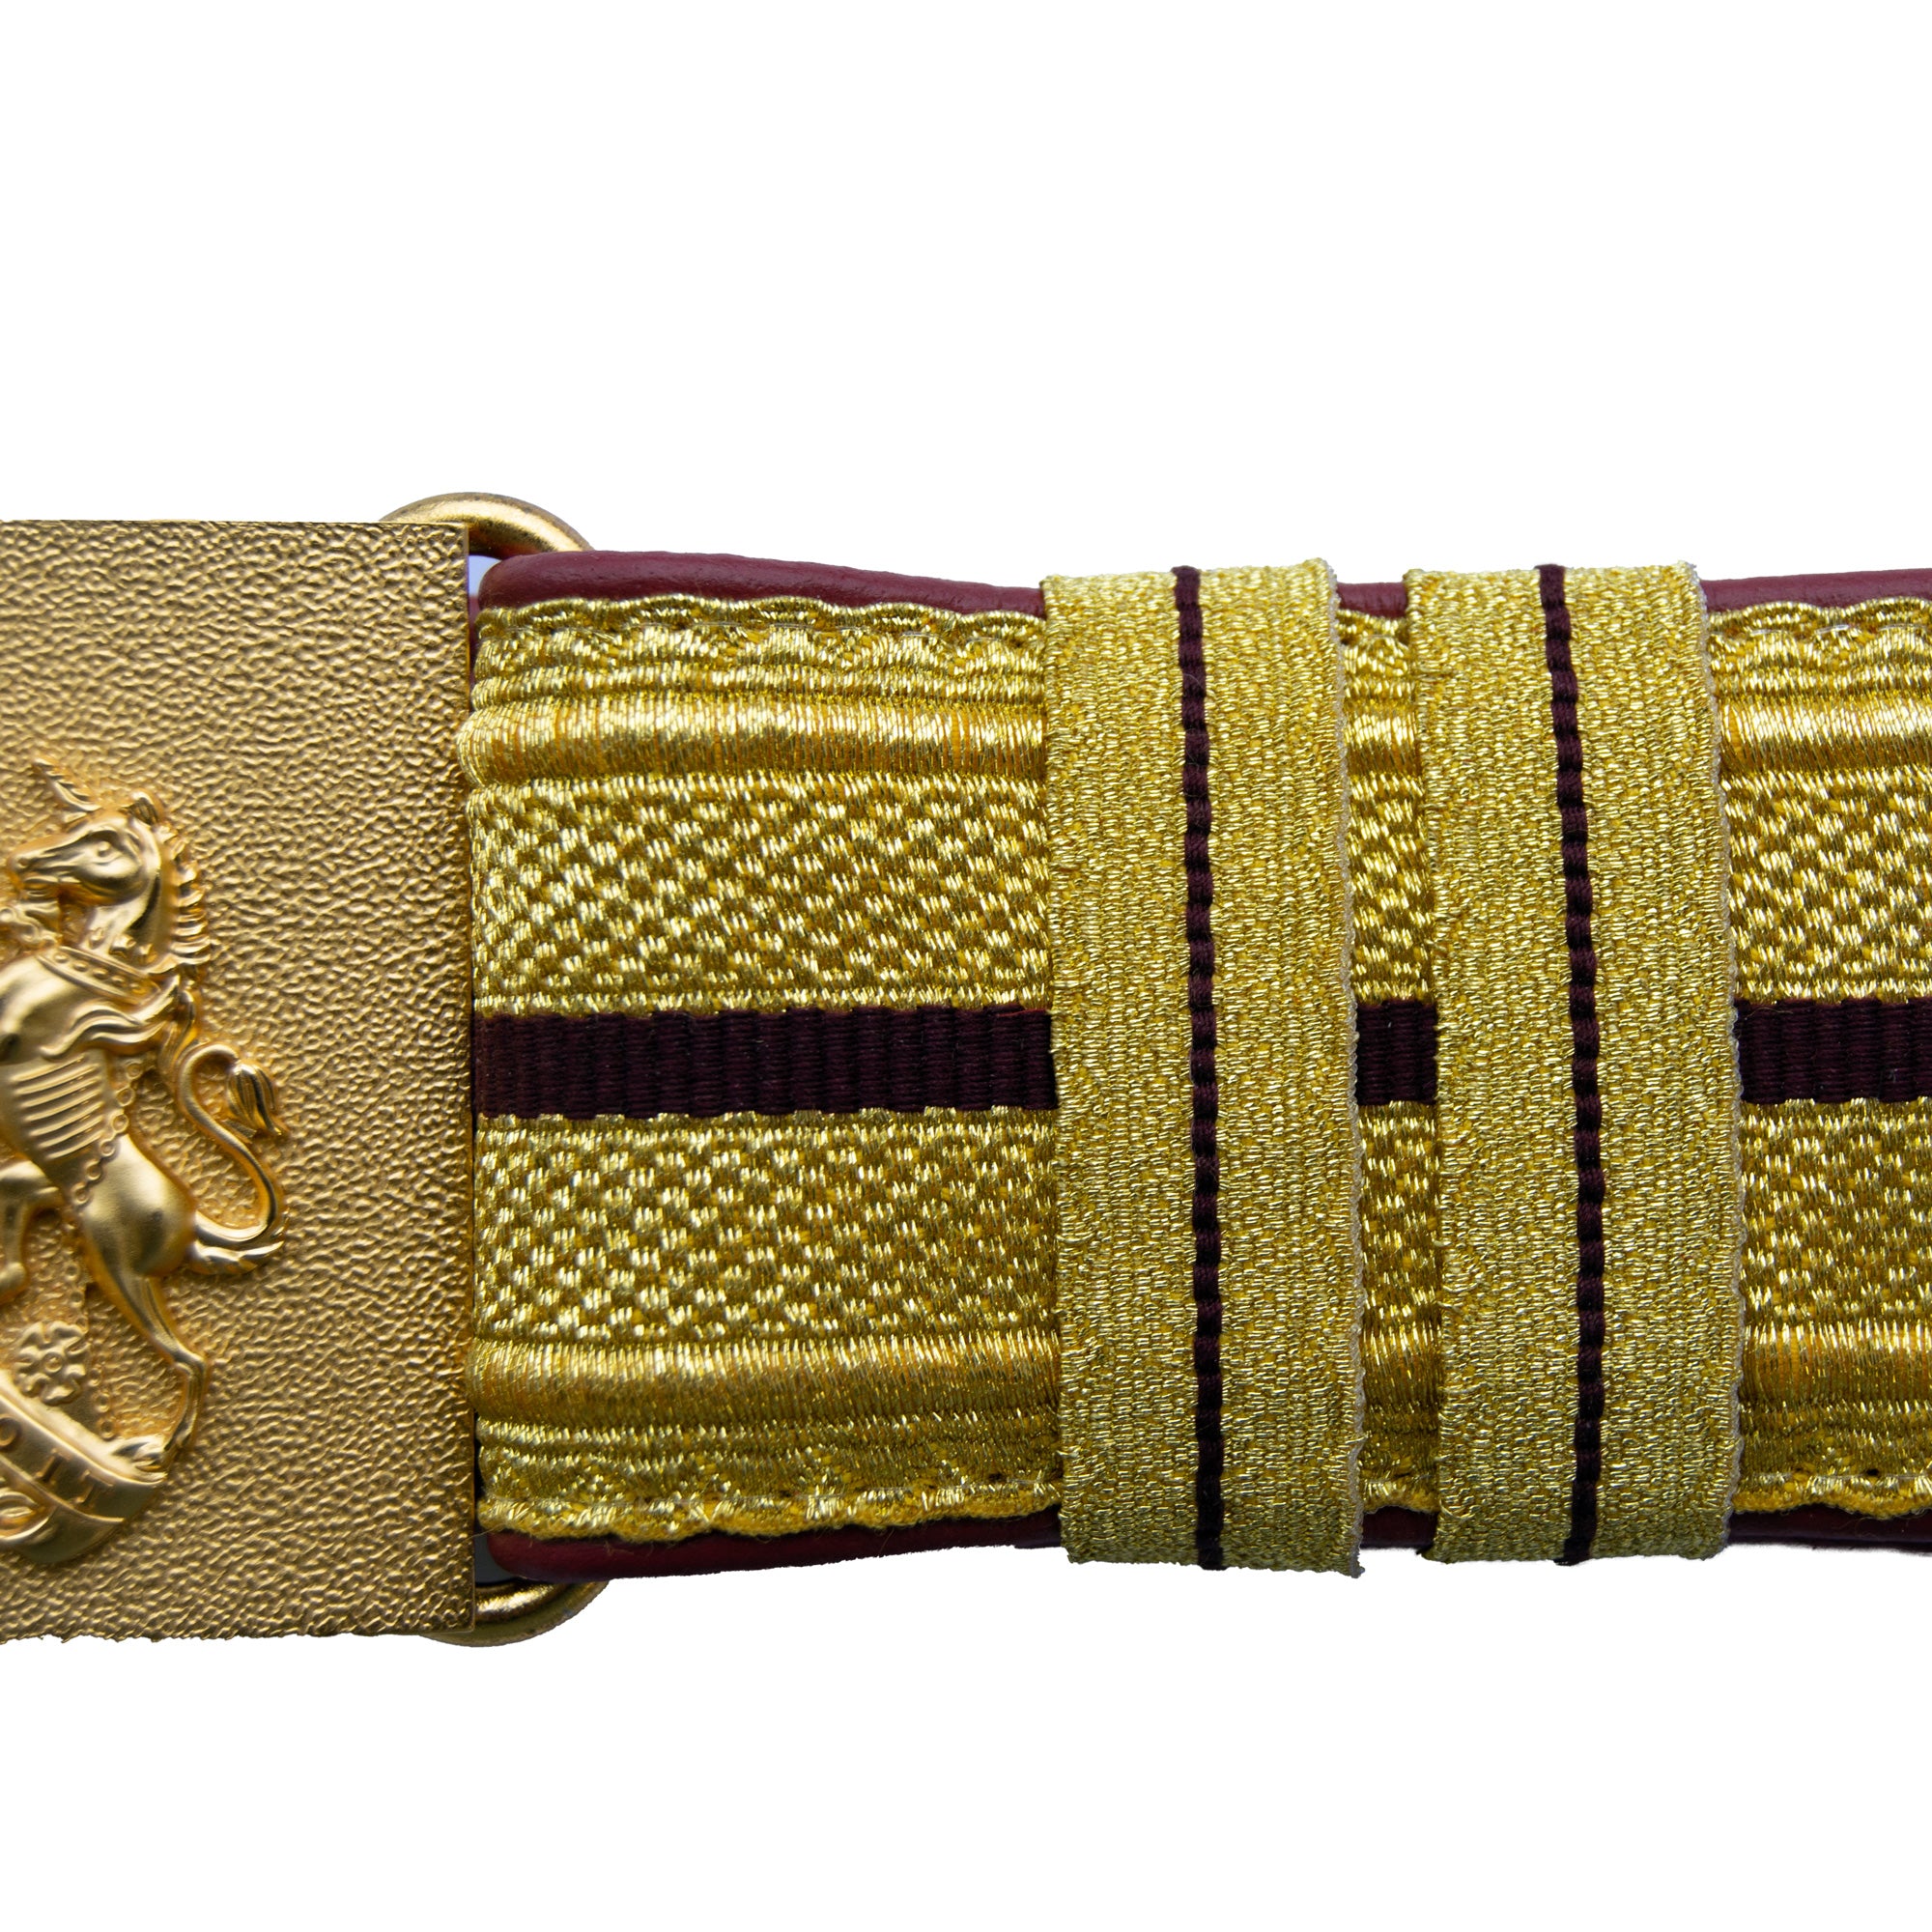 Ceremonial The Blues and Royals (RHG/D) Officers Waist Belt